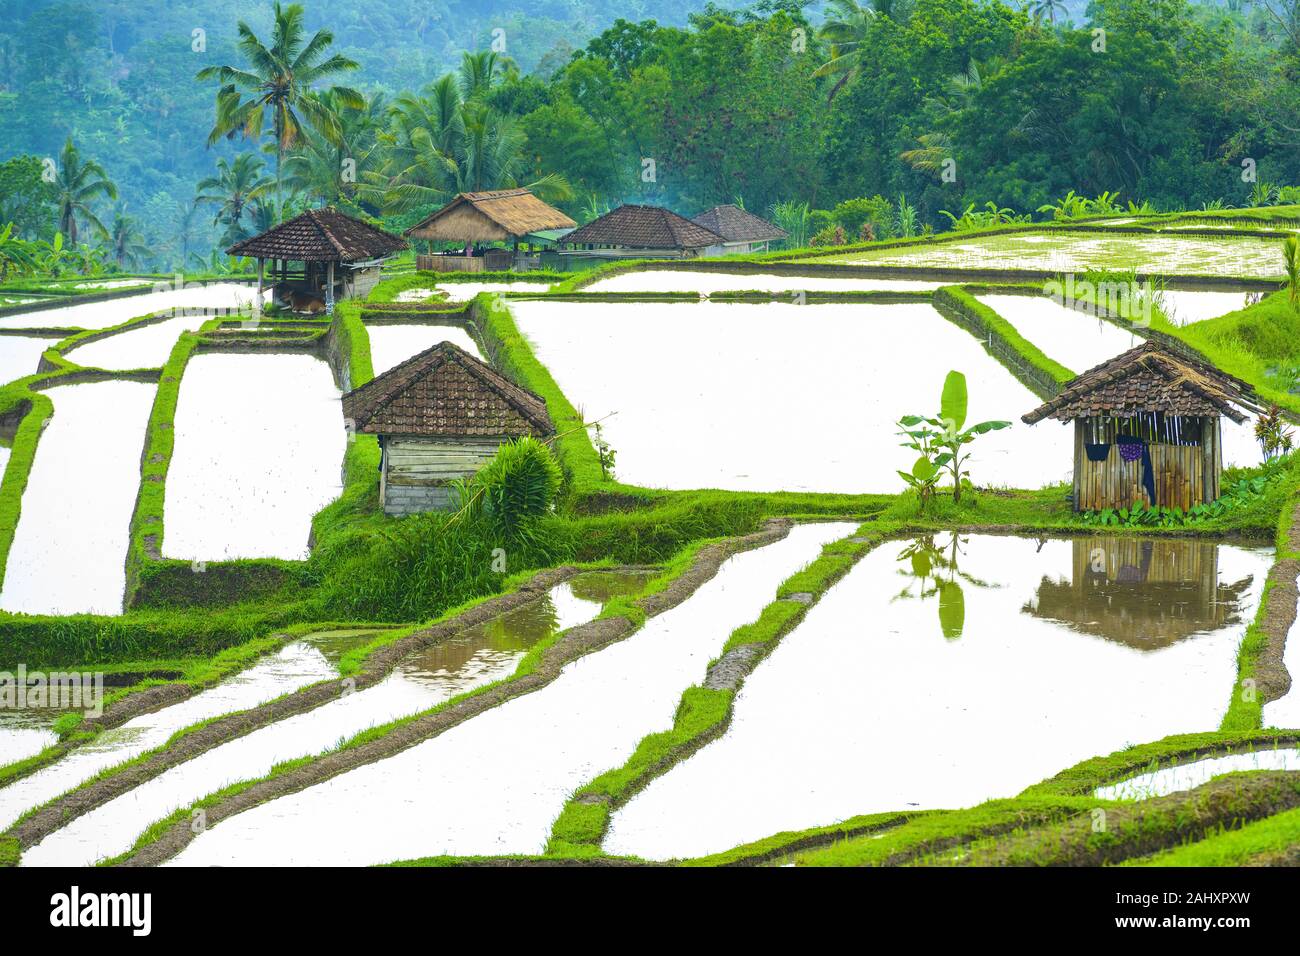 (Selective focus) Stunning view of the Jatiluwih rice terrace fields with some farmers huts. Stock Photo